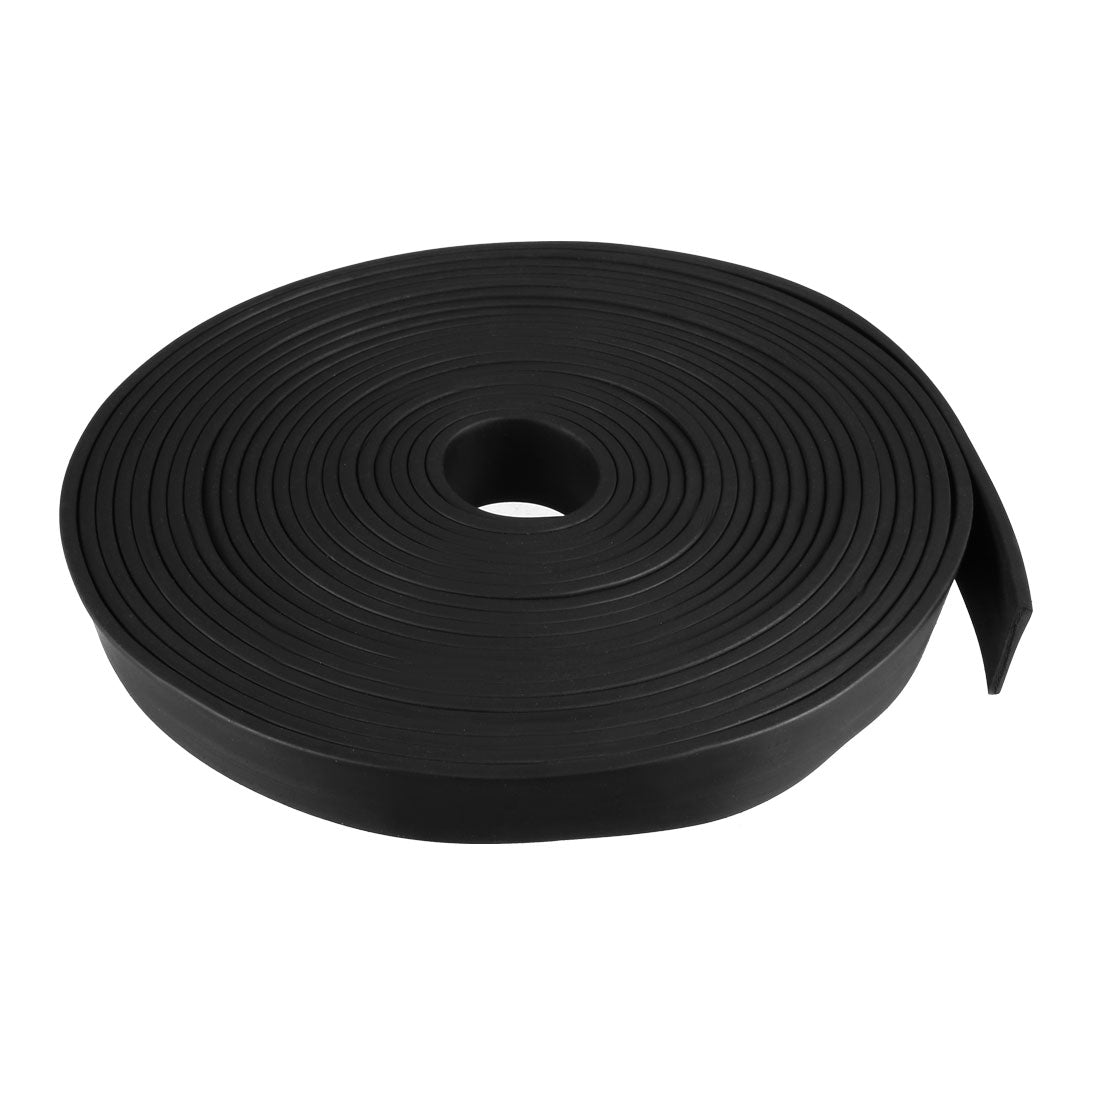 uxcell Uxcell Solid Rectangle Rubber Seal Strip 15mm Wide 2mm Thick, 5 Meters Long Black